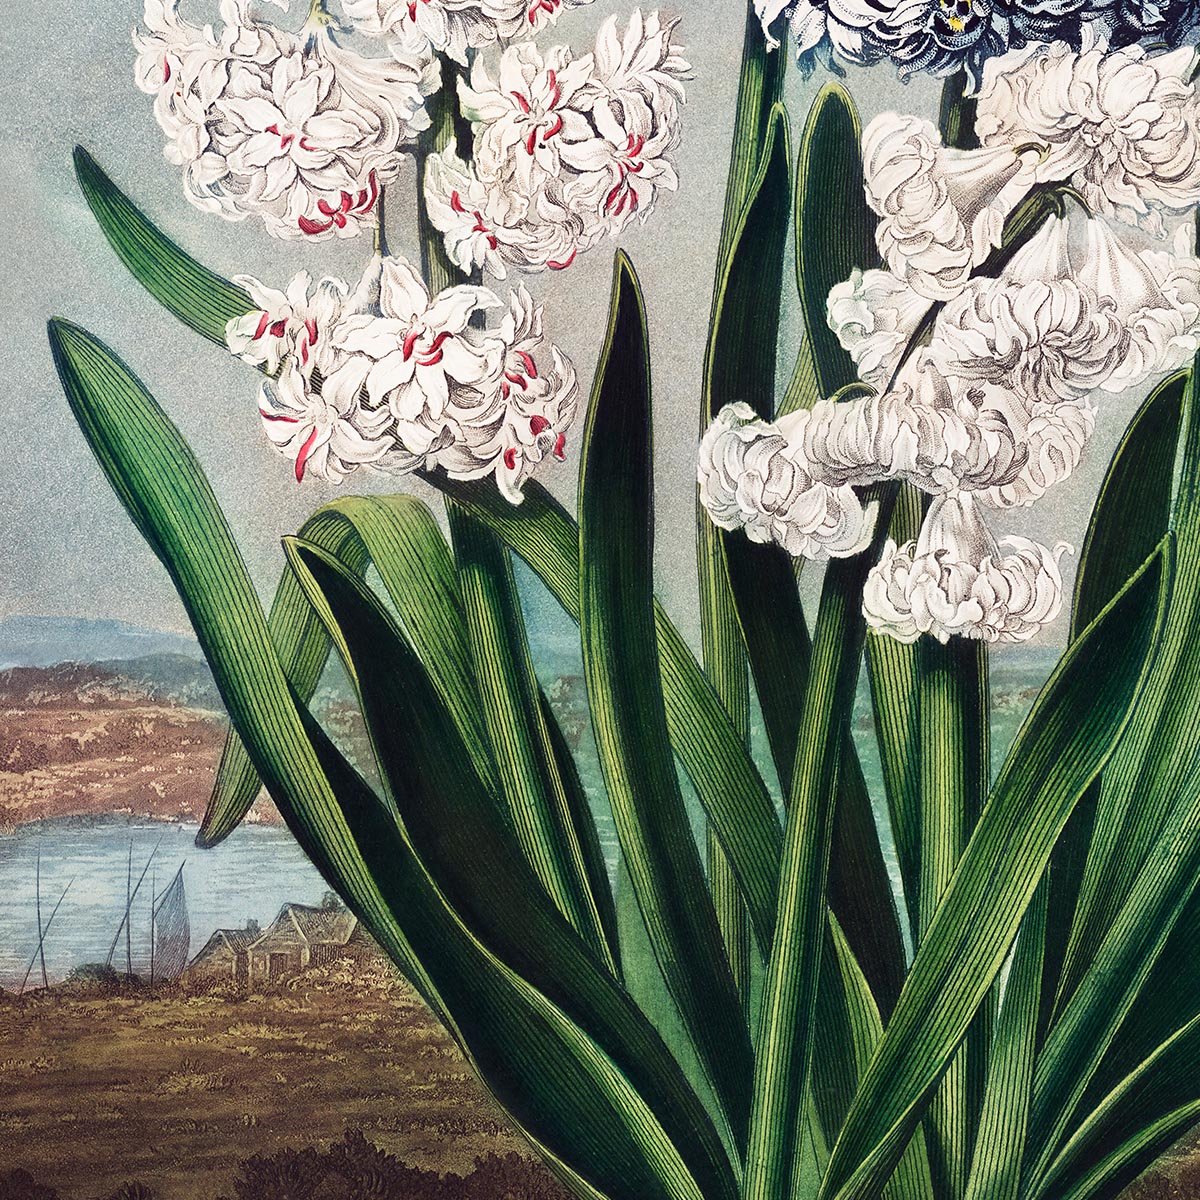 Hyacinths from Temple of Flora